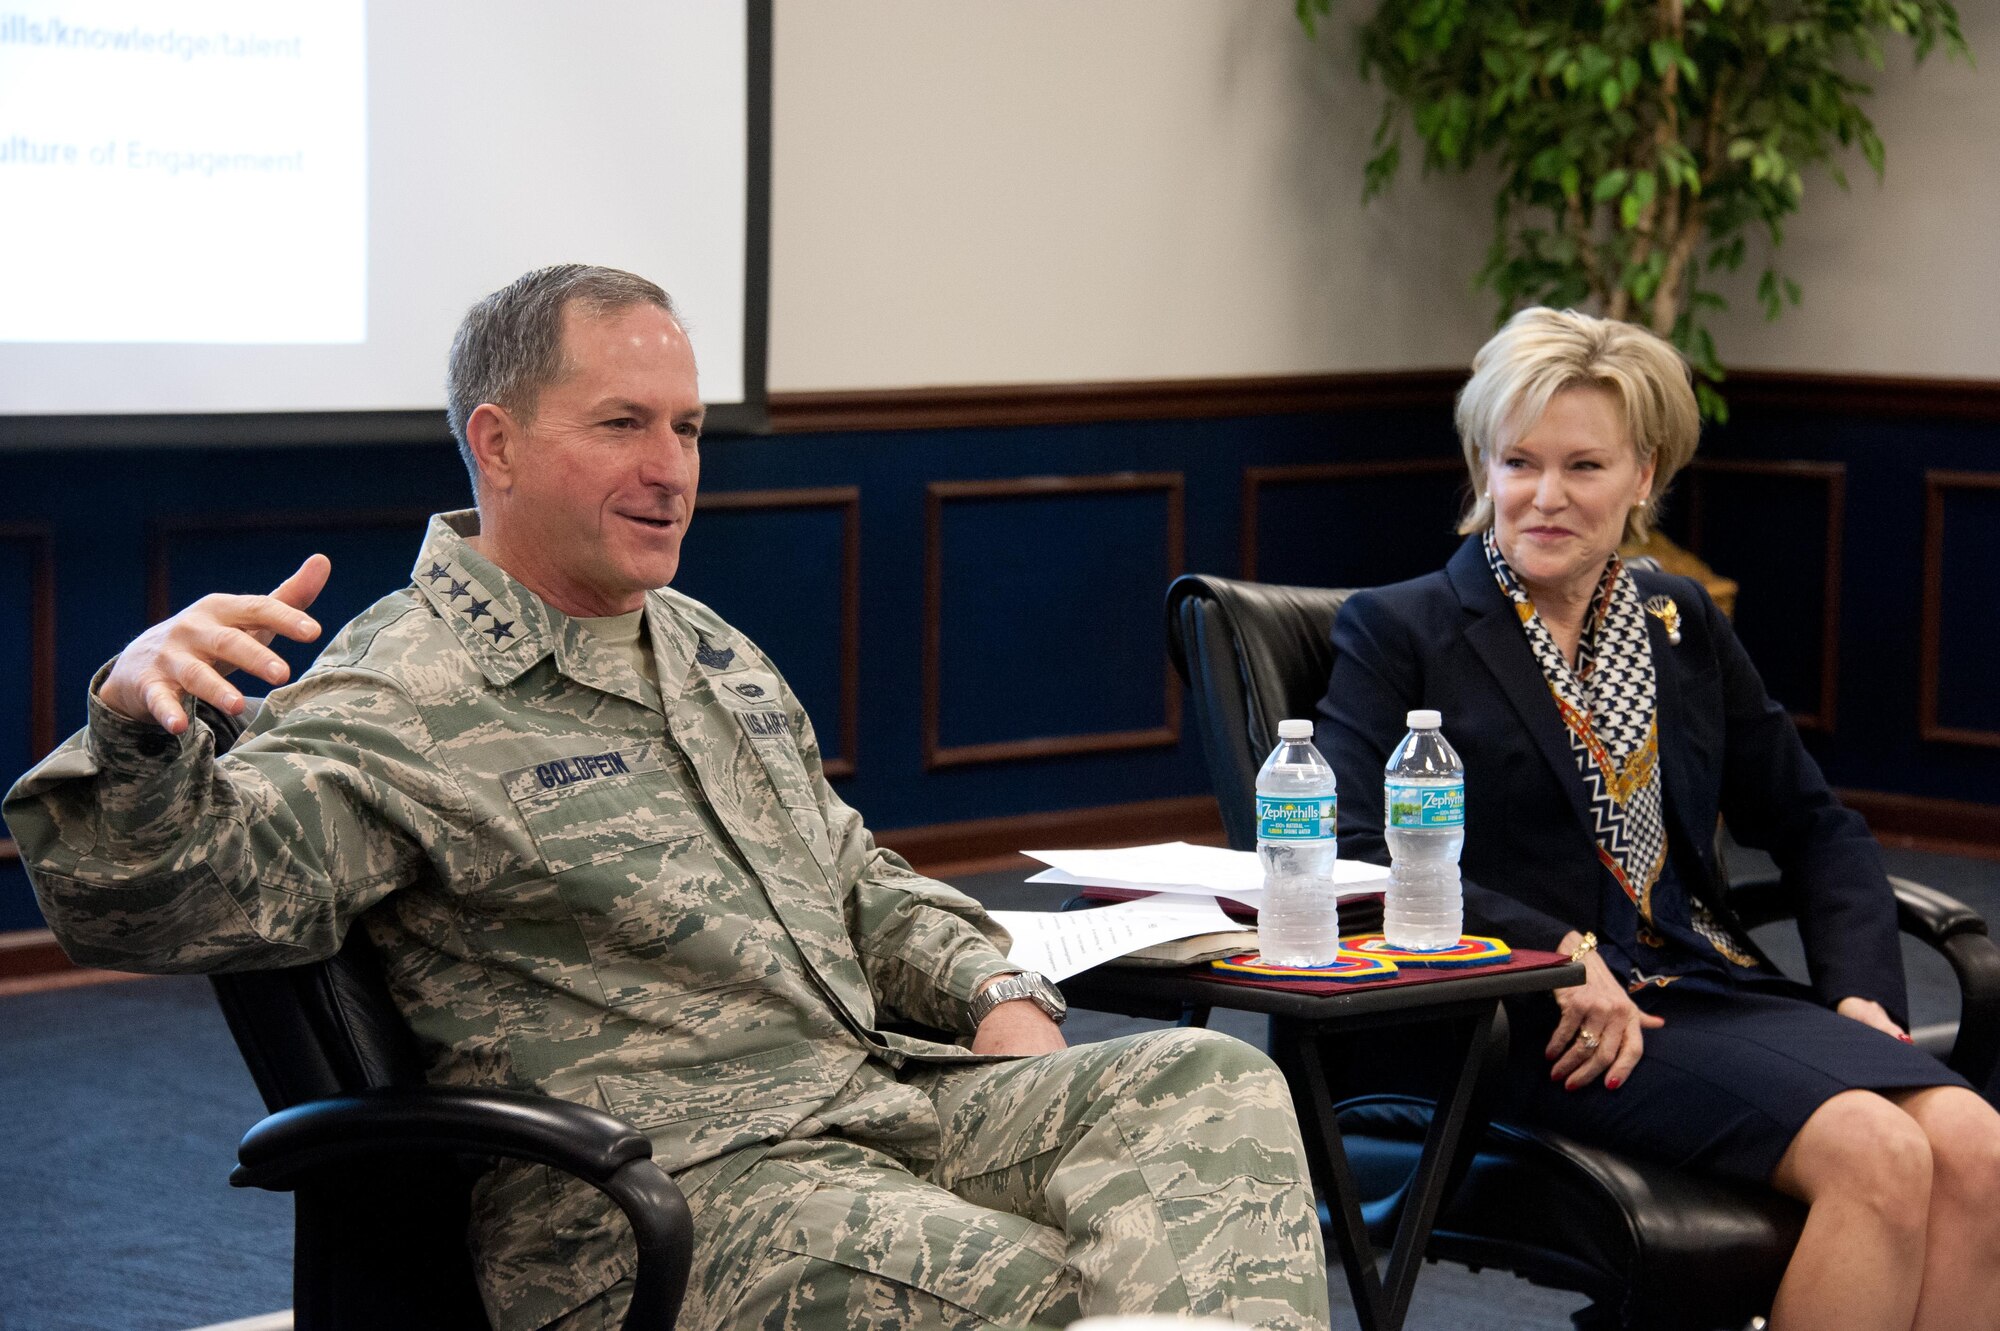 Air Force Chief of Staff Gen. David L. Goldfein addresses the Wing Commanders and Spouses courses as well as the Group Commander courses at the Eaker Center for Professional Development, Feb. 2, 2017. The Goldfeins spoke about the challenges and opportunities military leaders and their families. (US Air Force photo by Melanie Rodgers Cox)